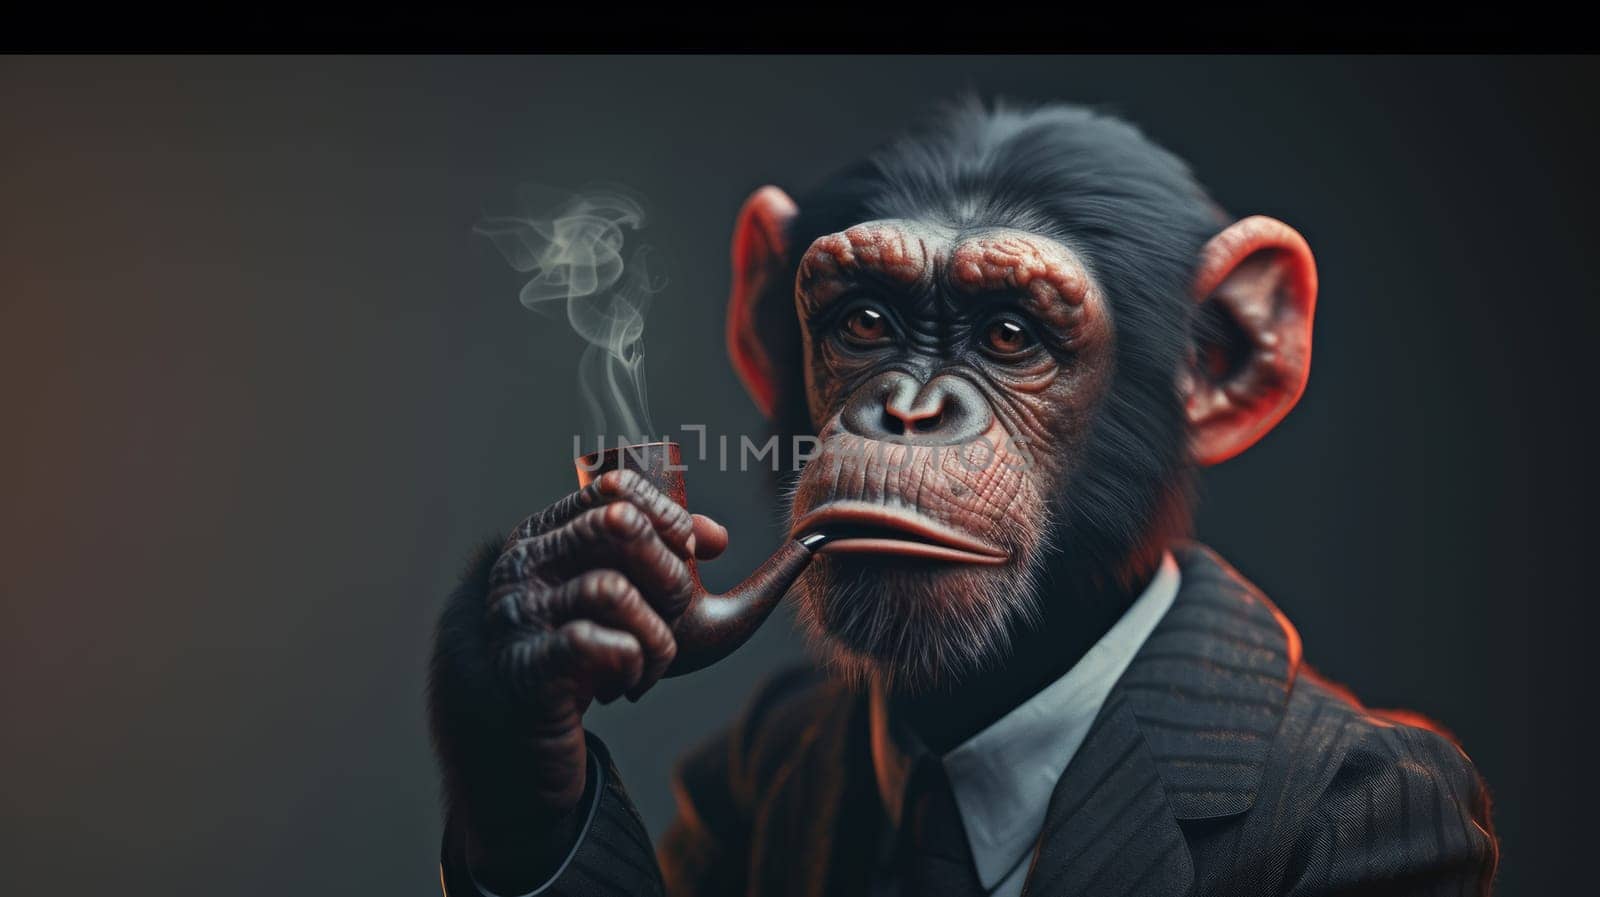 A monkey in a suit smoking and holding his pipe